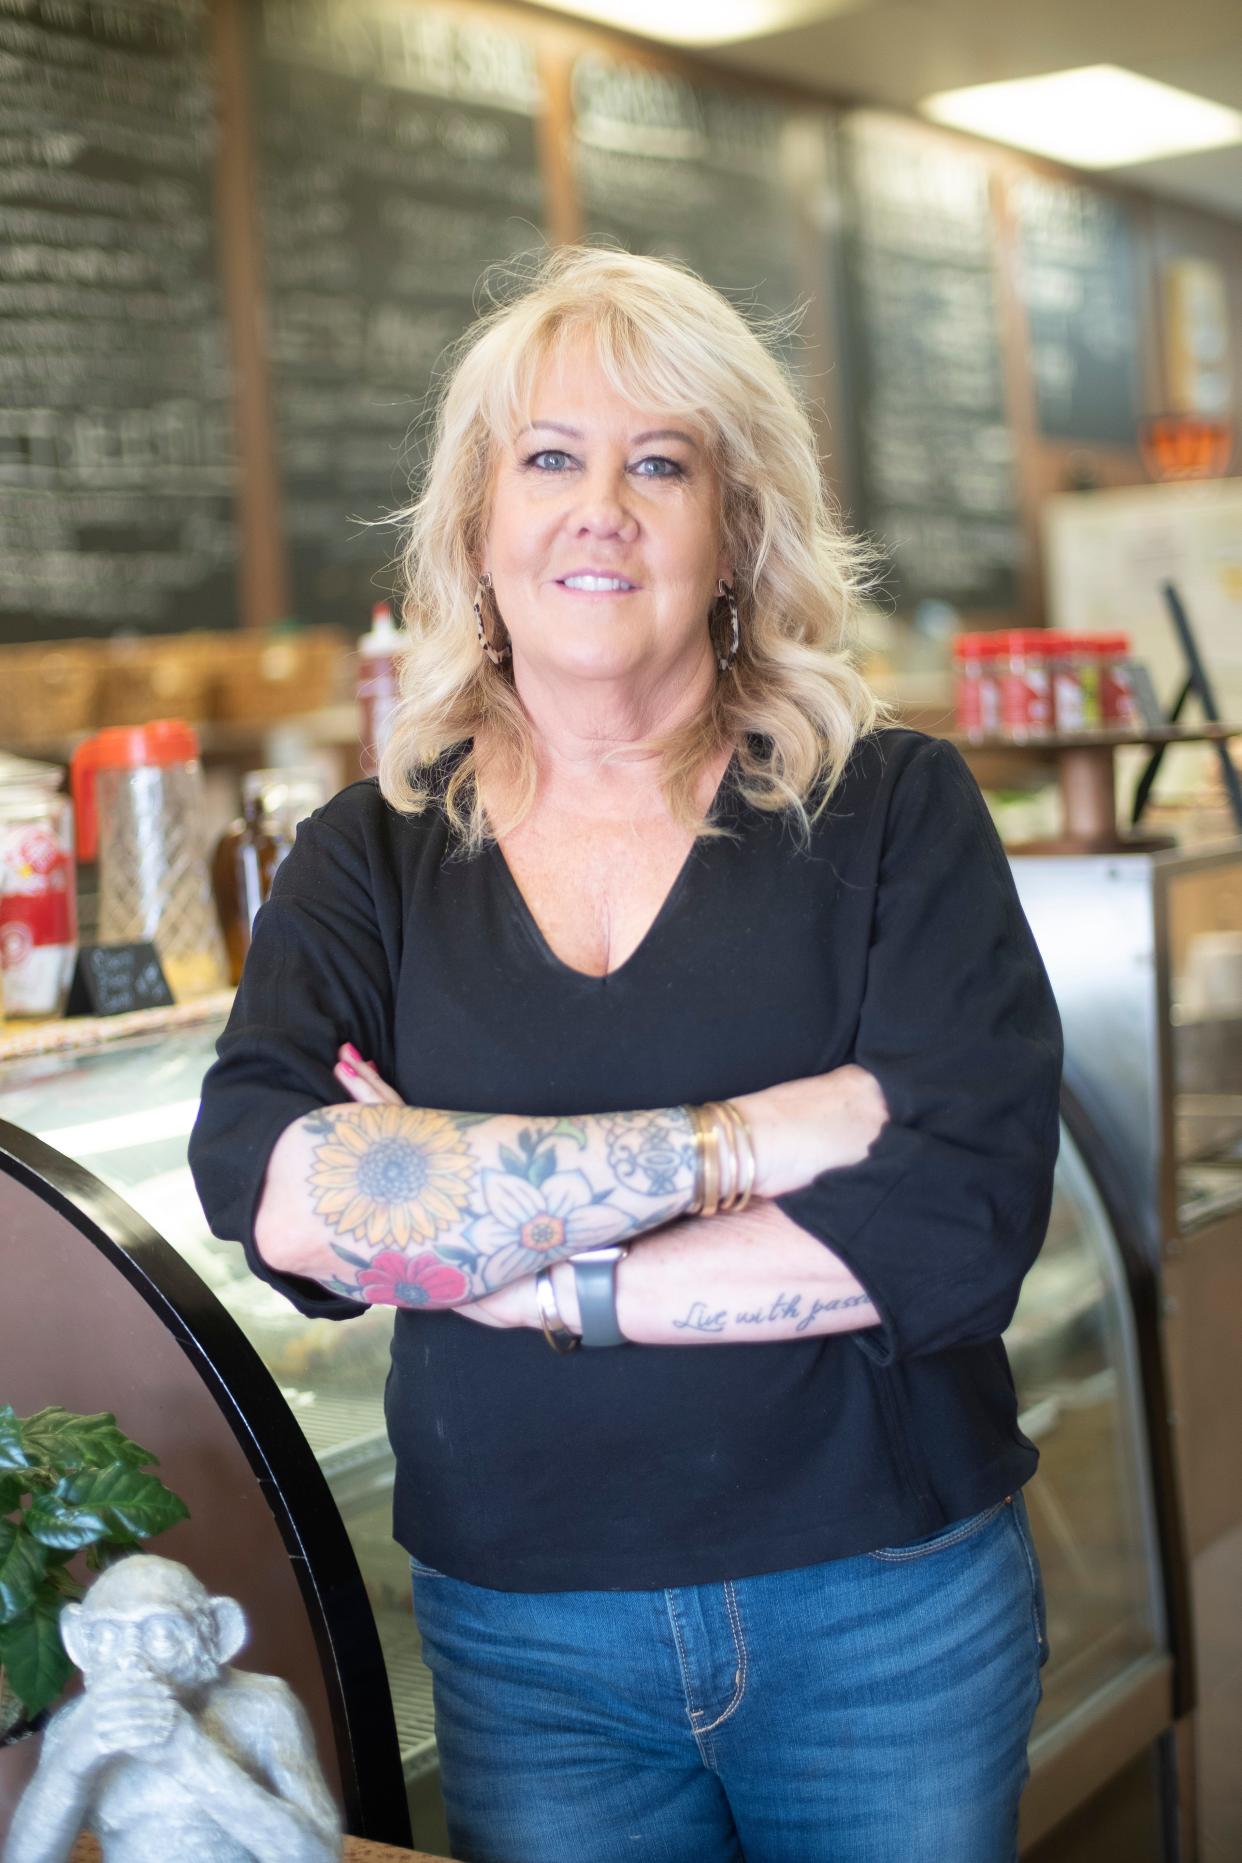 Owner Kim Wilcox at It's All So Yummy Café, 124 S. Peters Road, in Knoxville, Tenn. on Thursday, June 4, 2020.